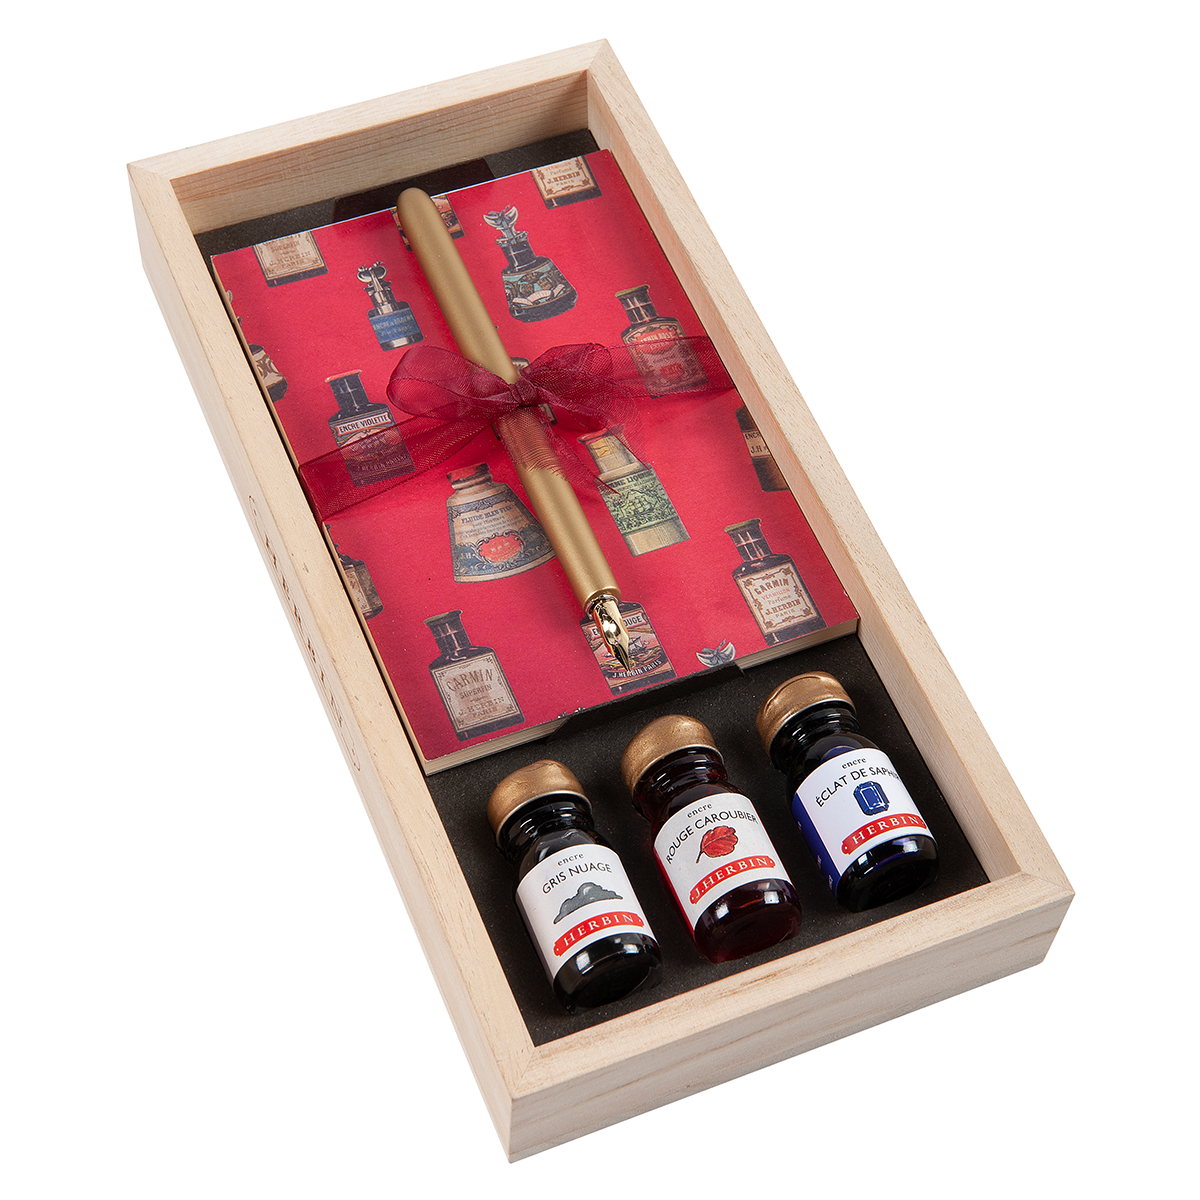 J Herbin Gift Calligraphy Set Available from